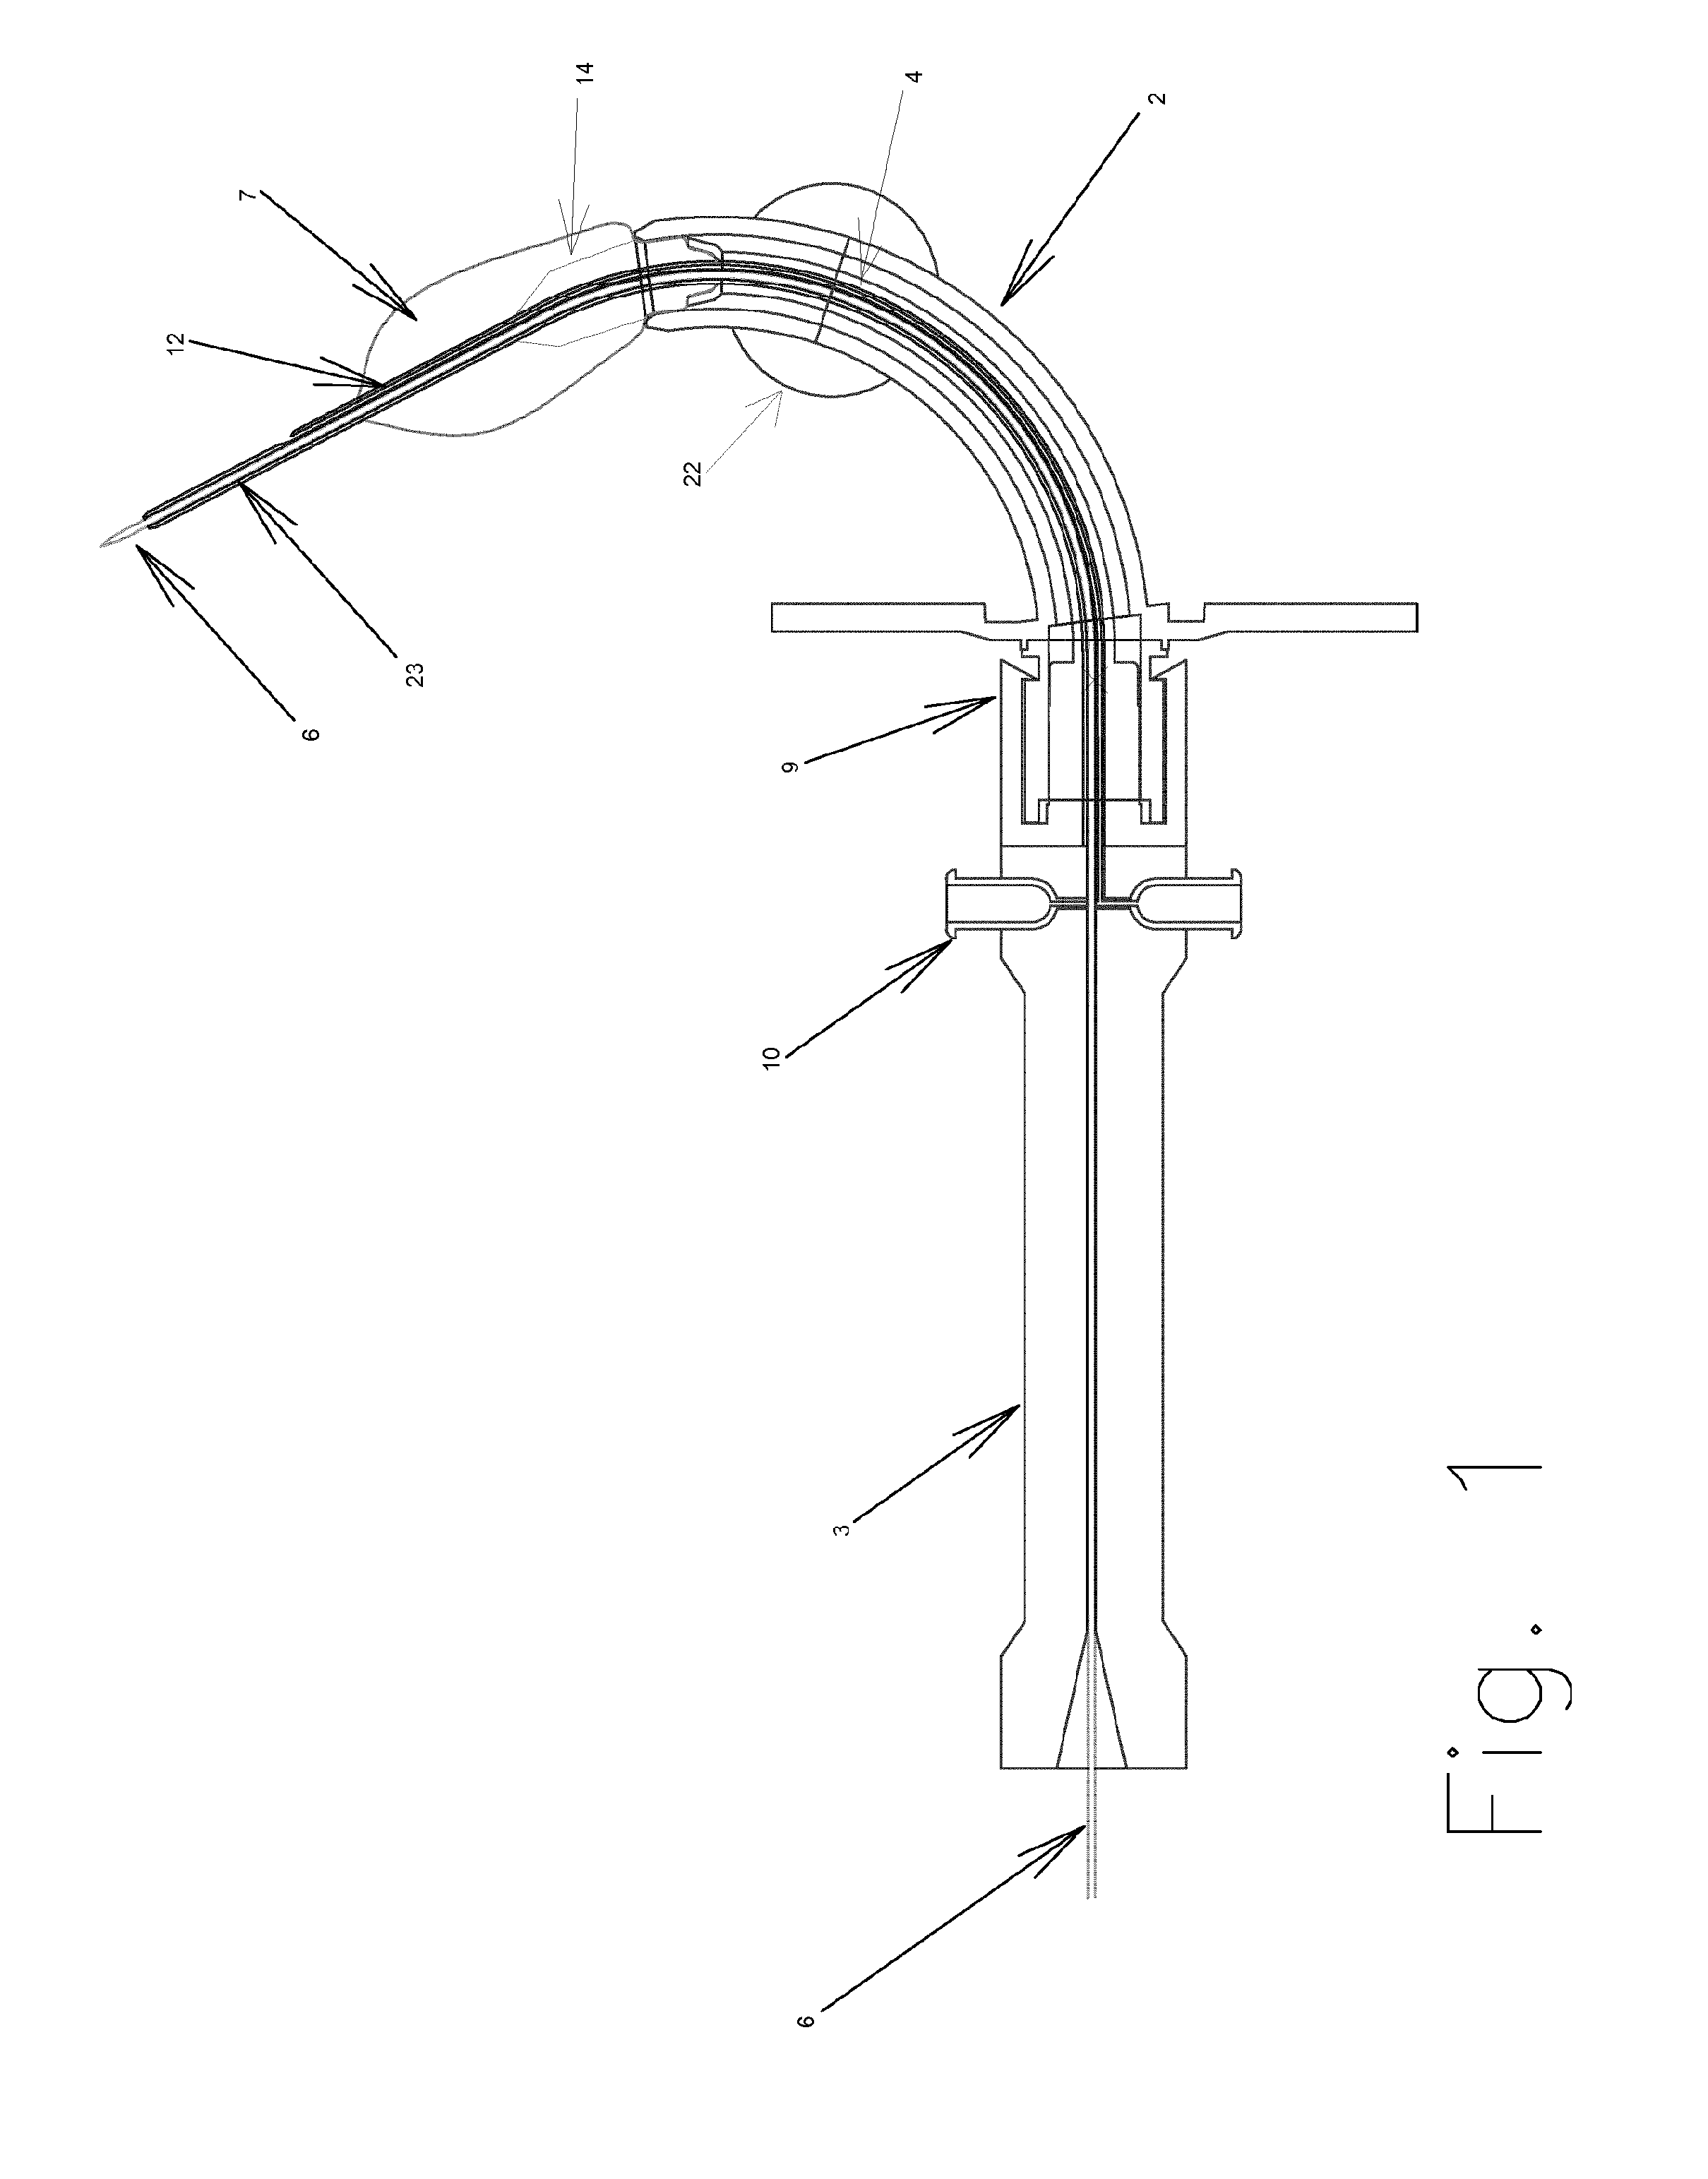 Dilatation system for a medical device